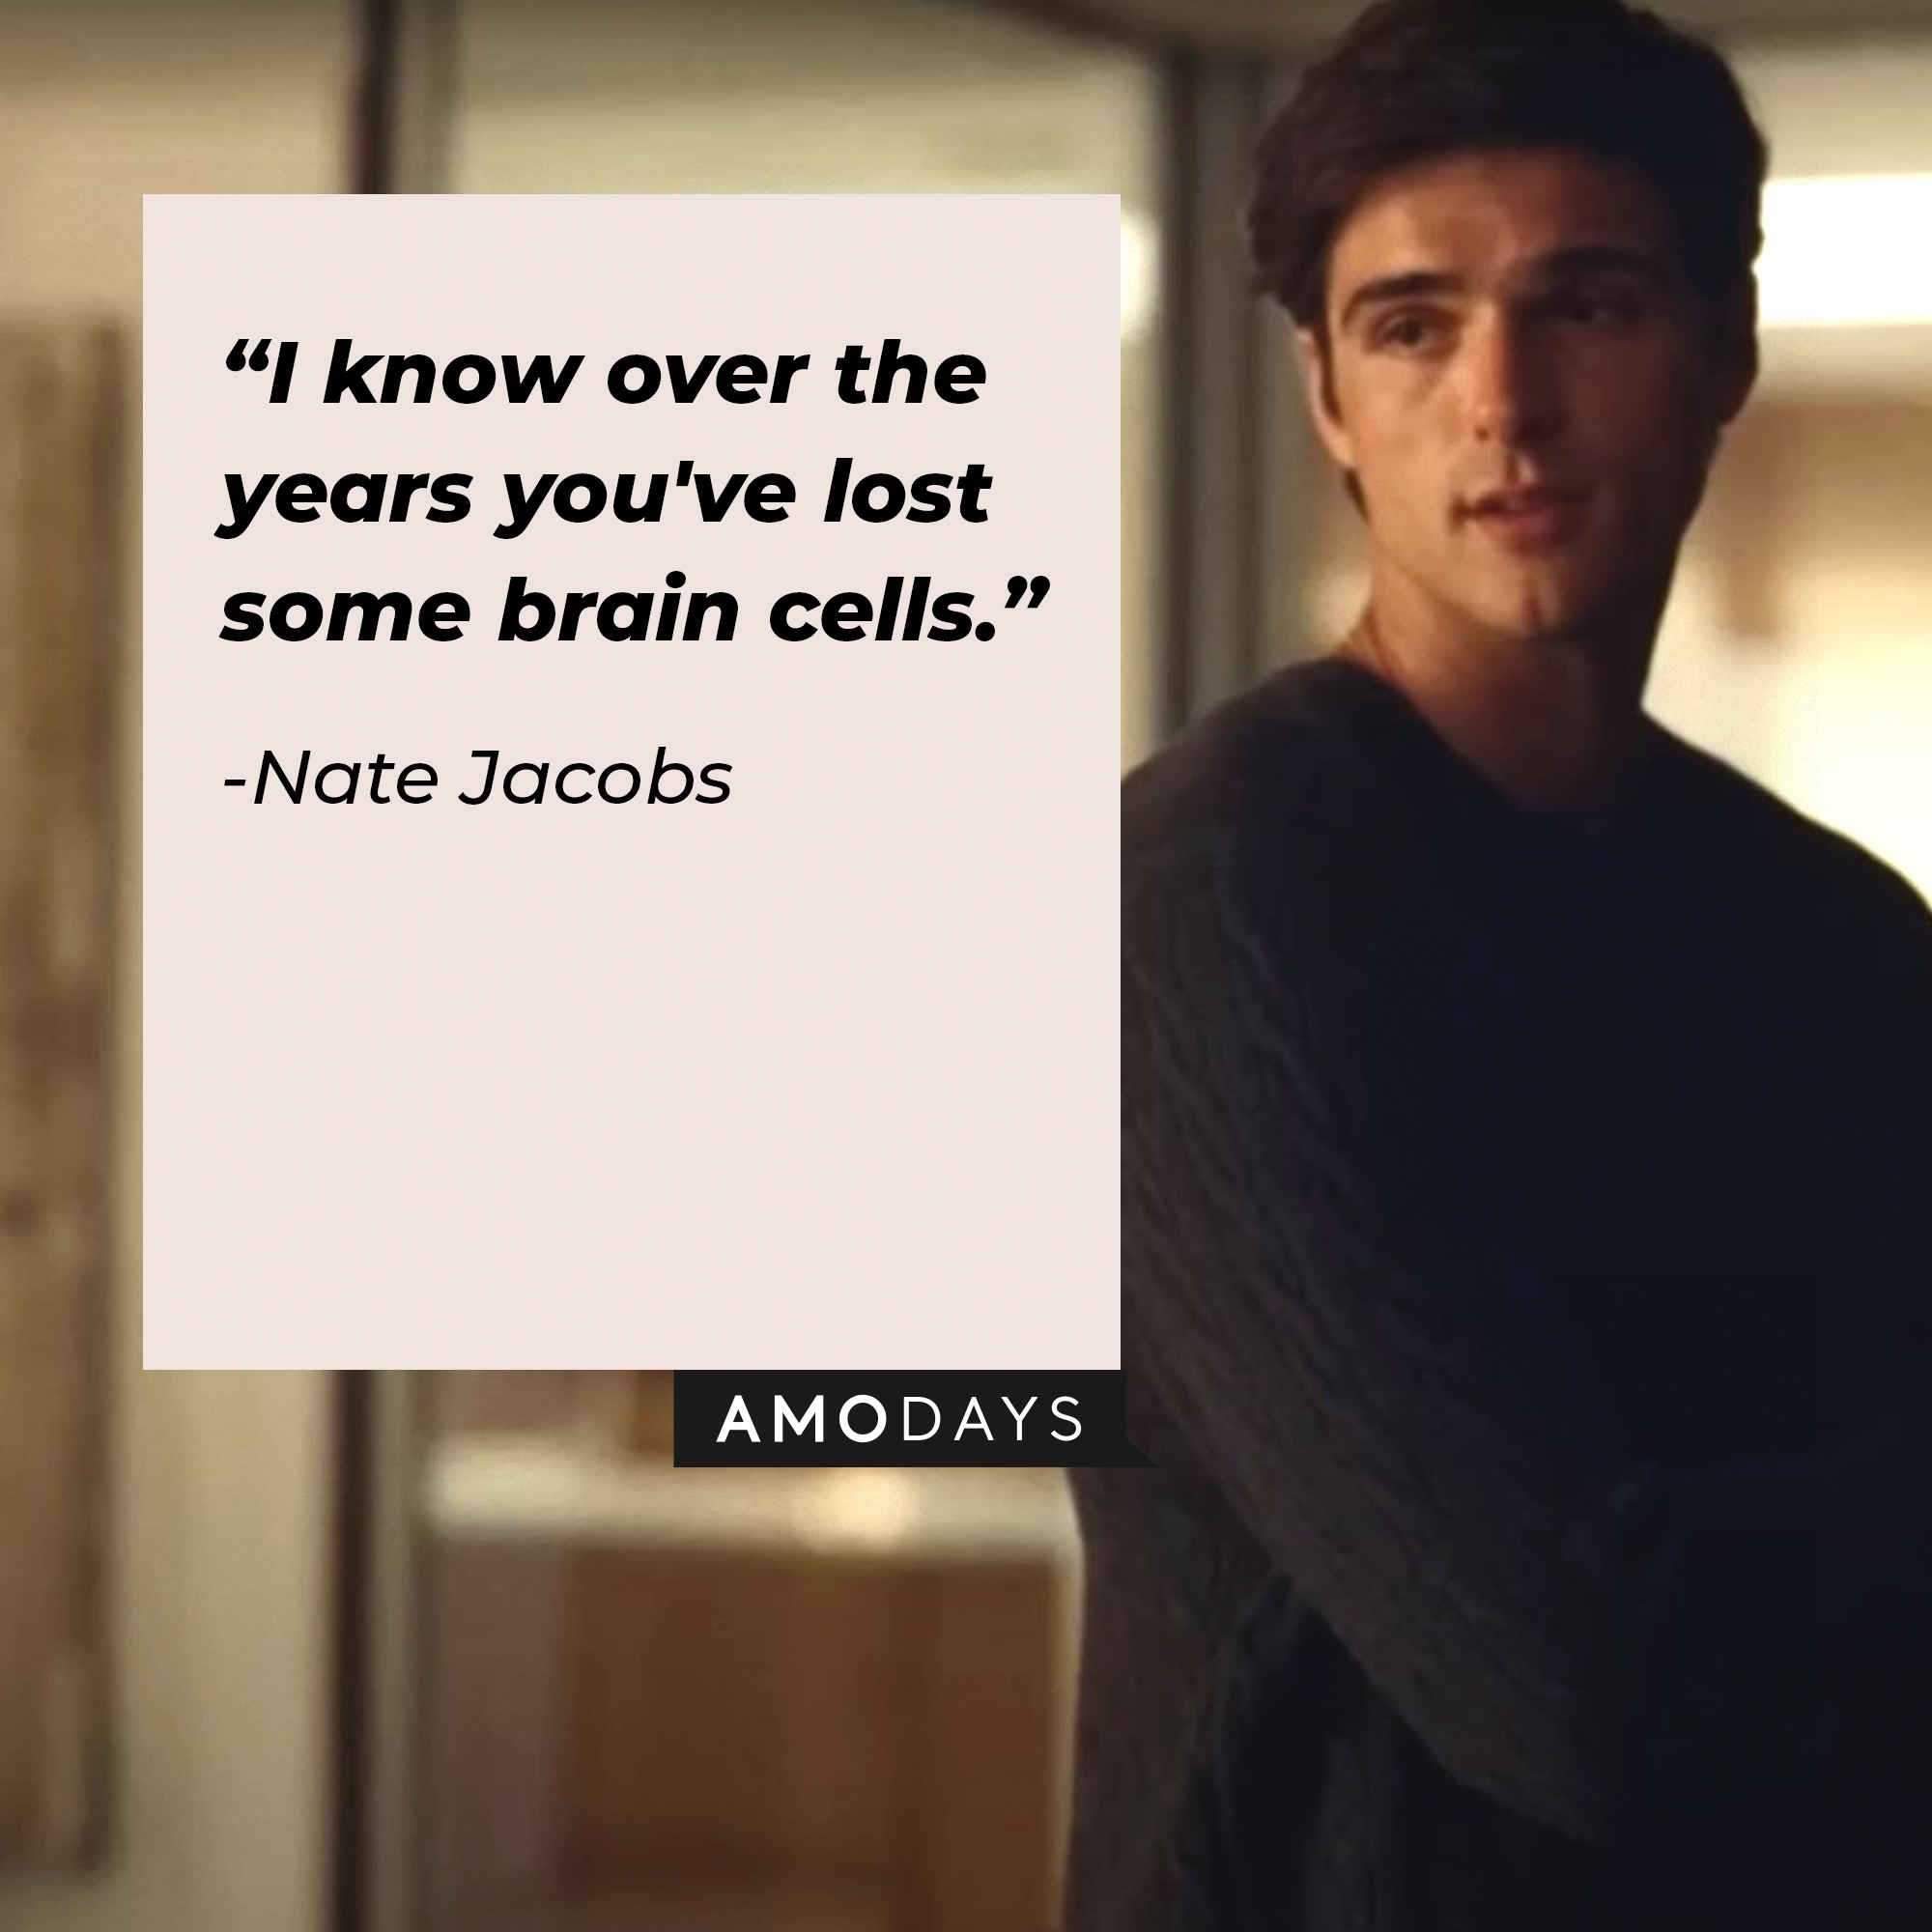 An image of Nate Jacobs with his quote: “I know over the years you've lost some brain cells.” | Source: facebook.com/Euphoria